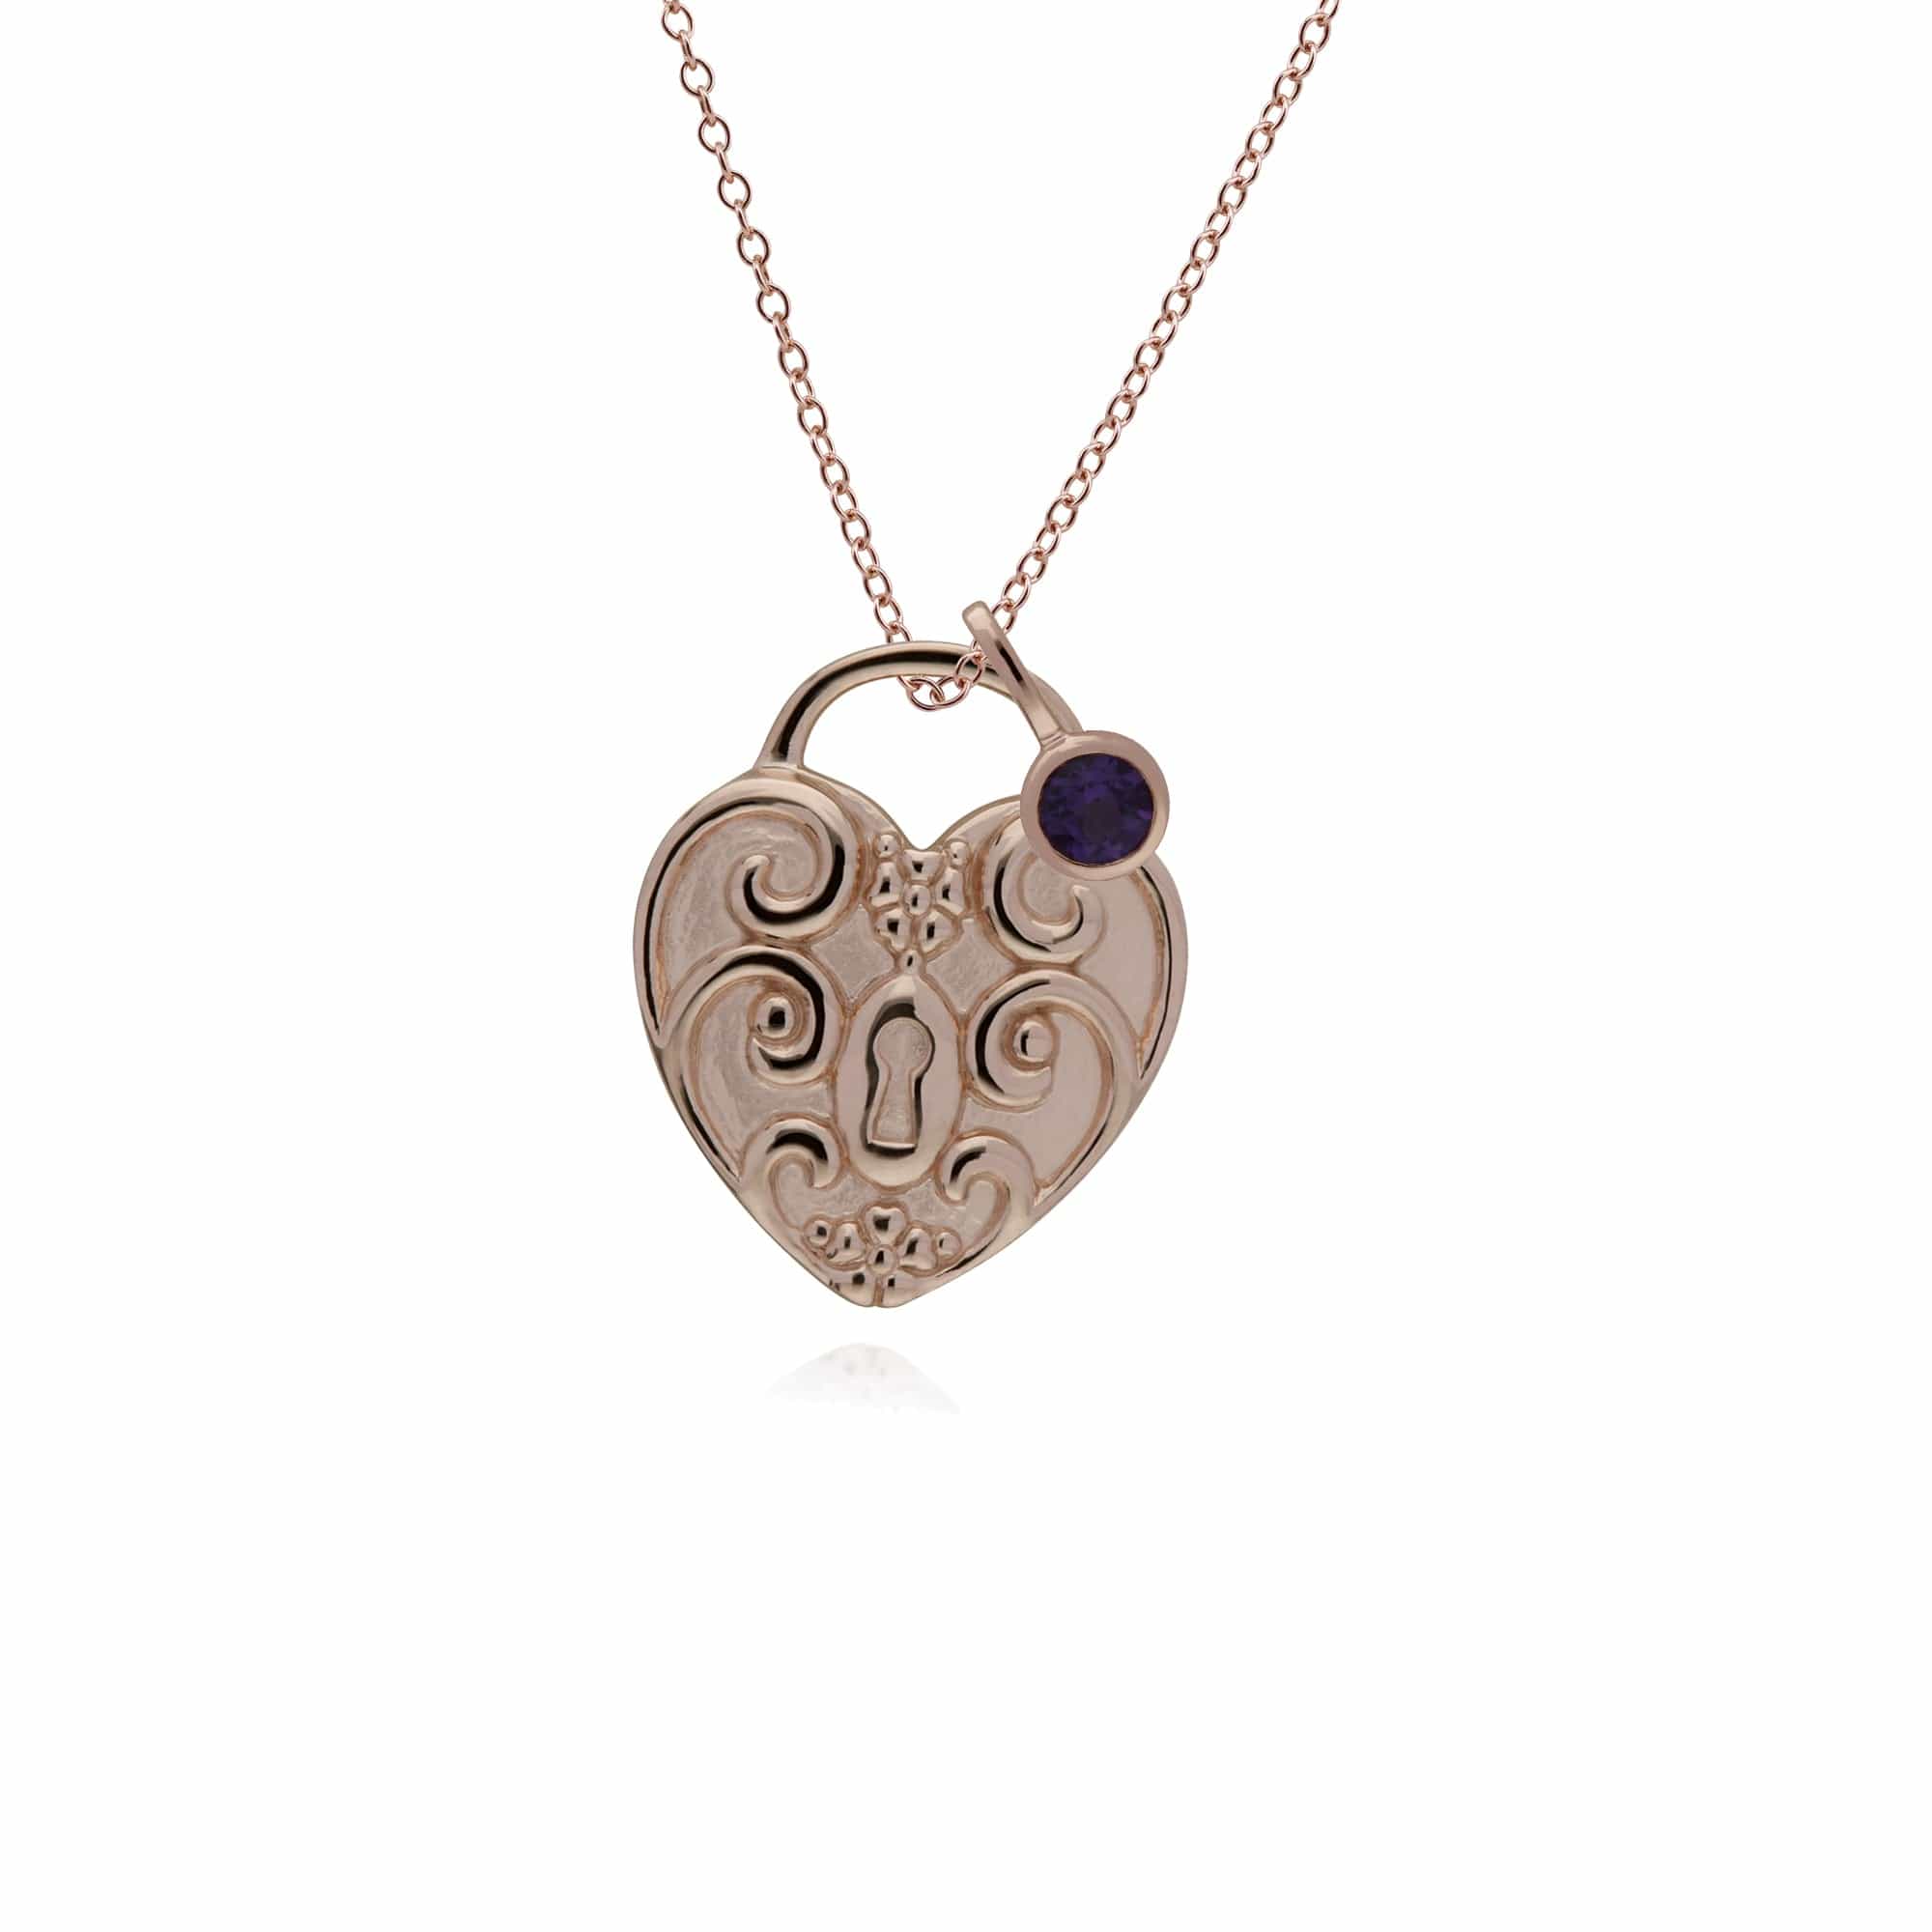 270P027301925-270P026501925 Classic Swirl Heart Lock Pendant & Amethyst Charm in Rose Gold Plated 925 Sterling Silver 1